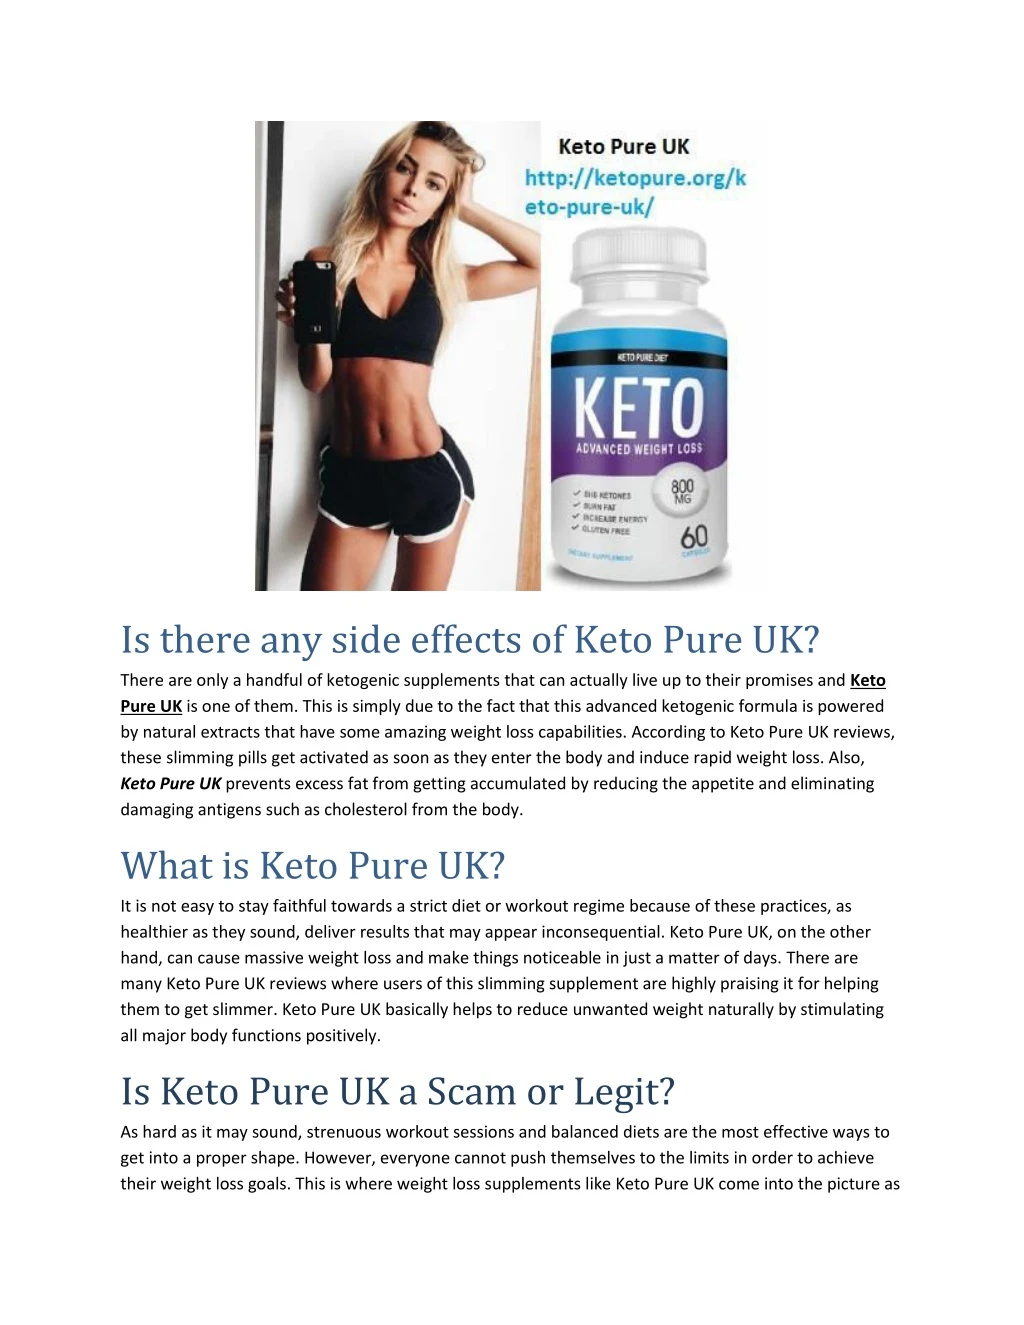 is there any side effects of keto pure uk